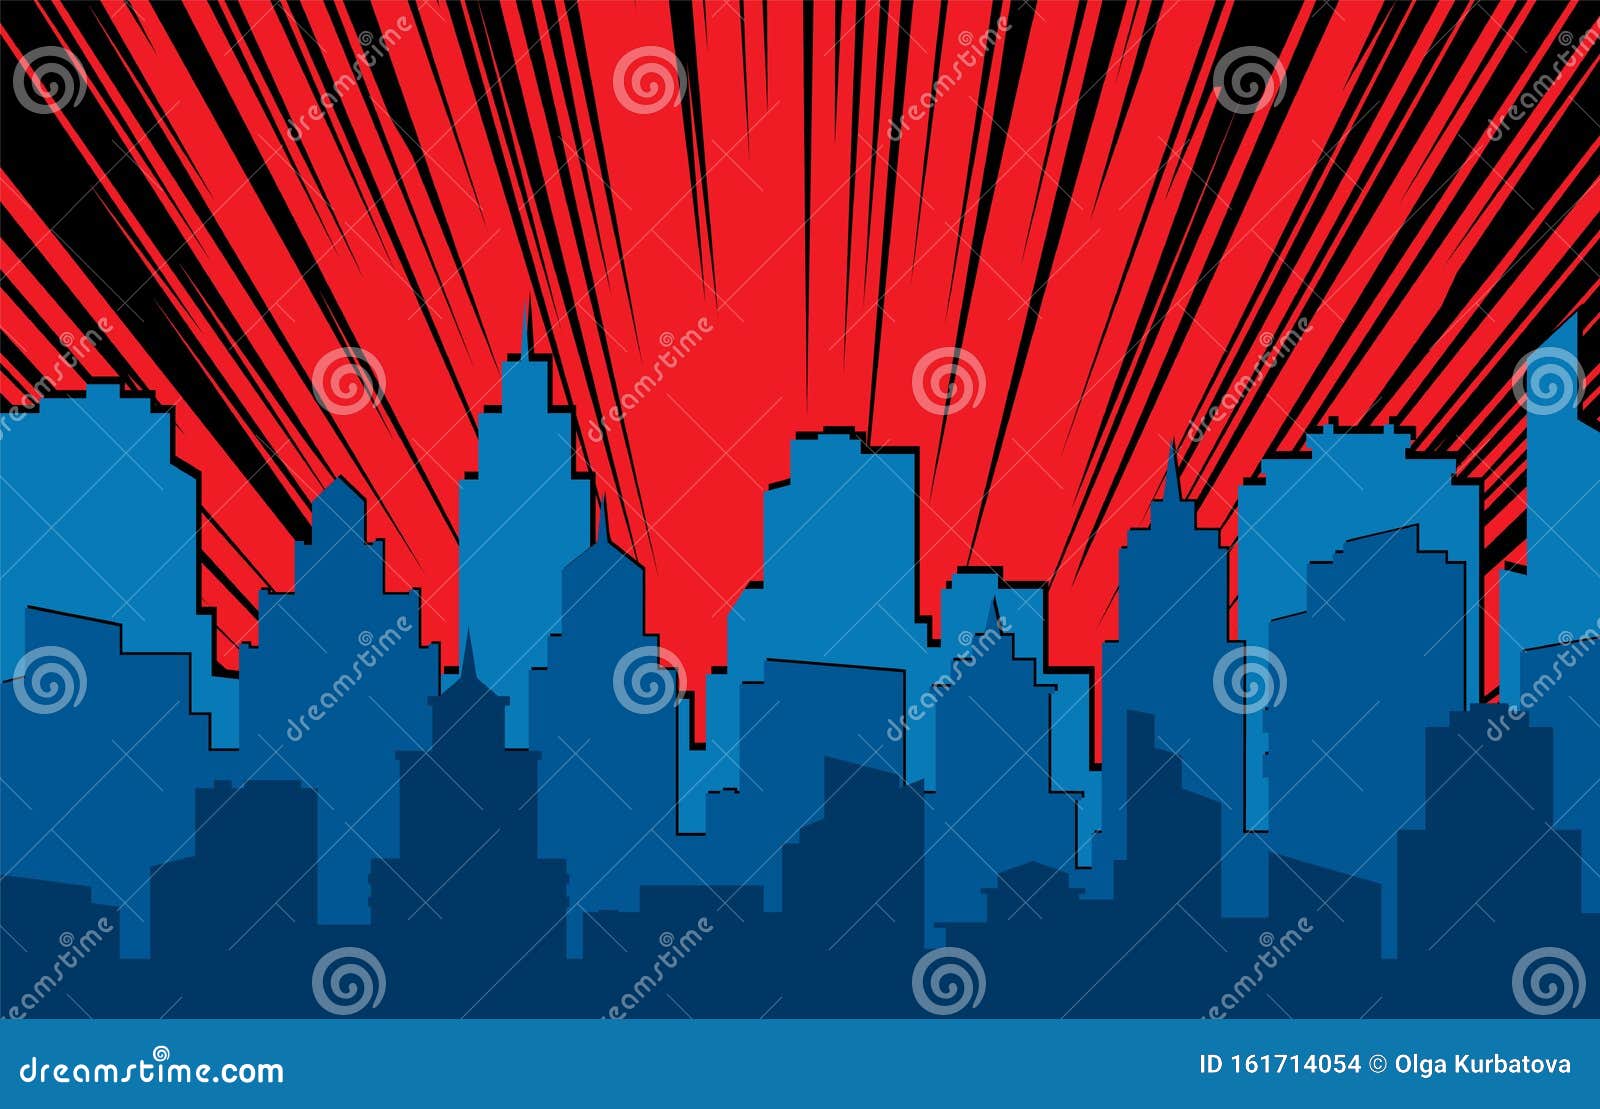 comic cityscape. retro urban silhouette of city buildings for art book comics with light effects  scene background